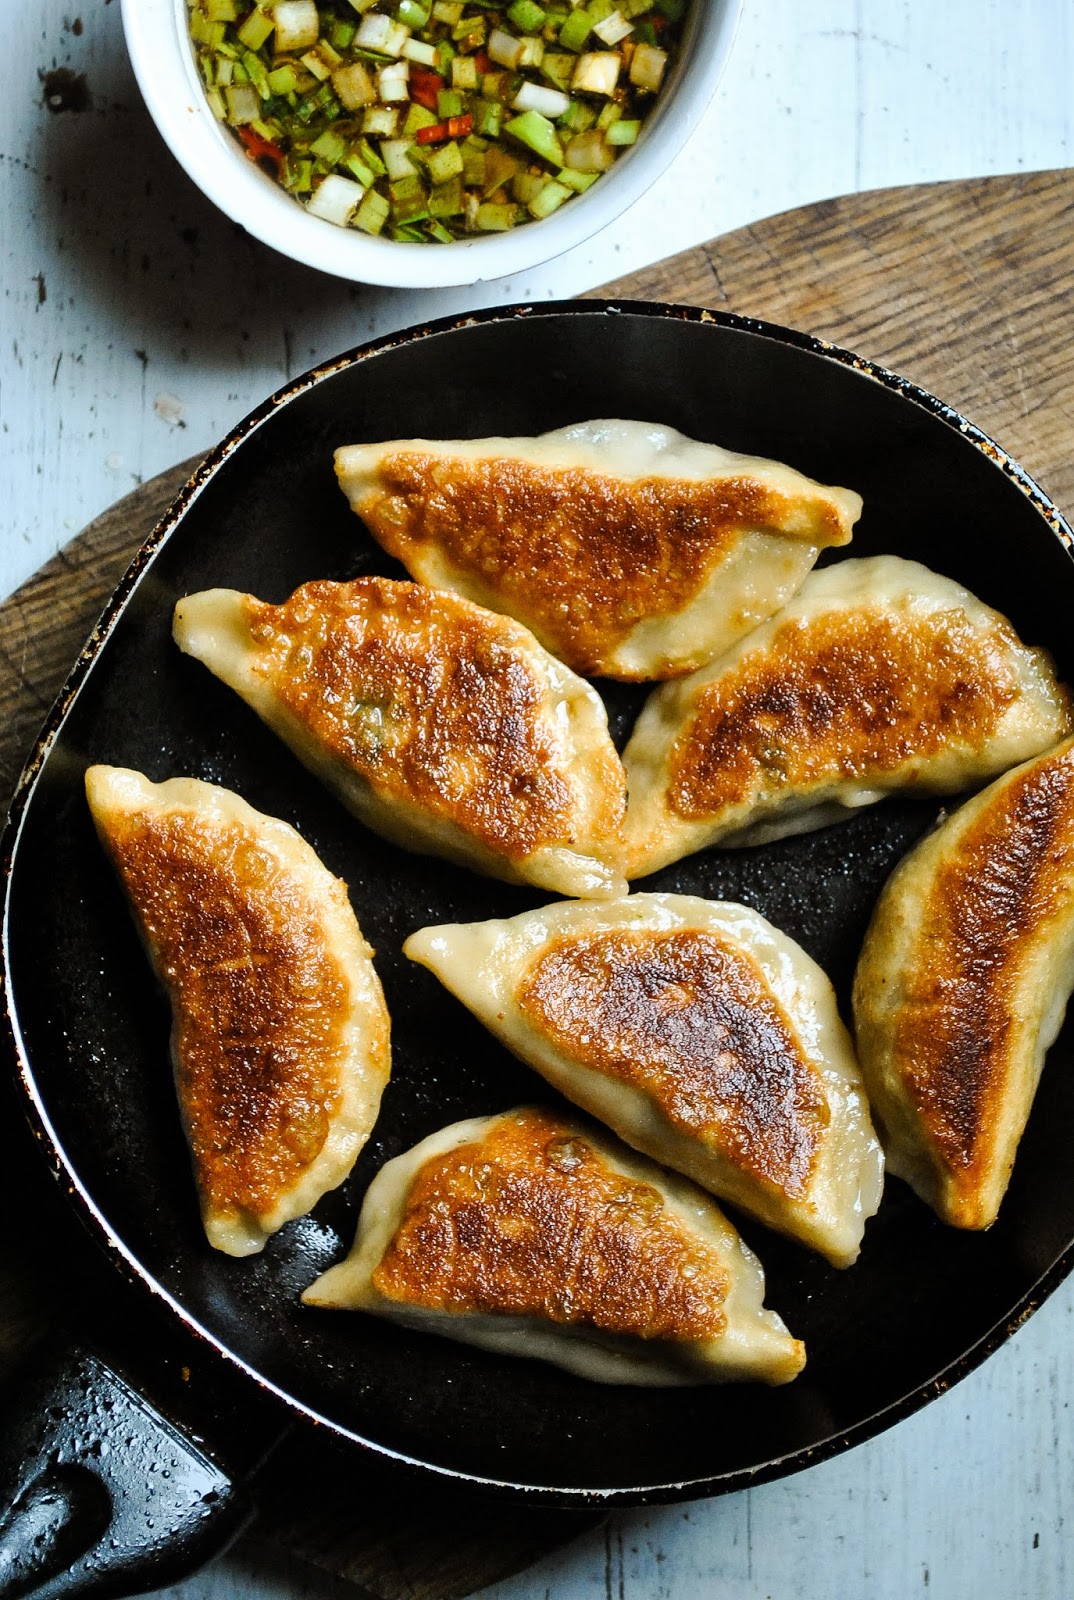 Crispy pot stickers (Chinese dumplings) with spicy mushroom and spinach ...